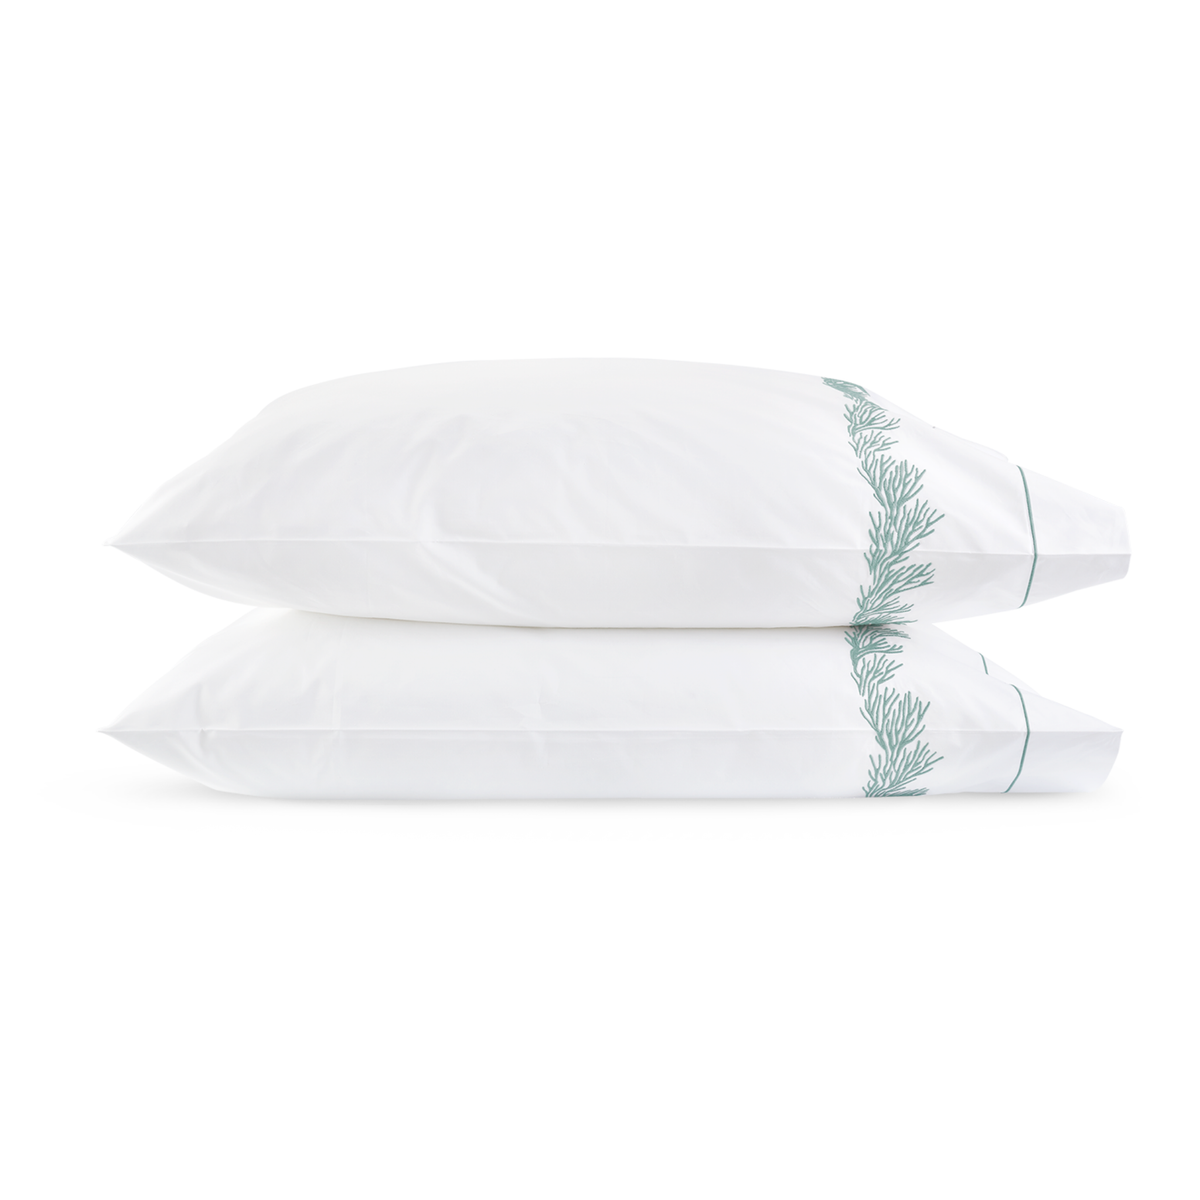 Pair of Pillowcases of Matouk Atoll Bedding Collection Aegean Color